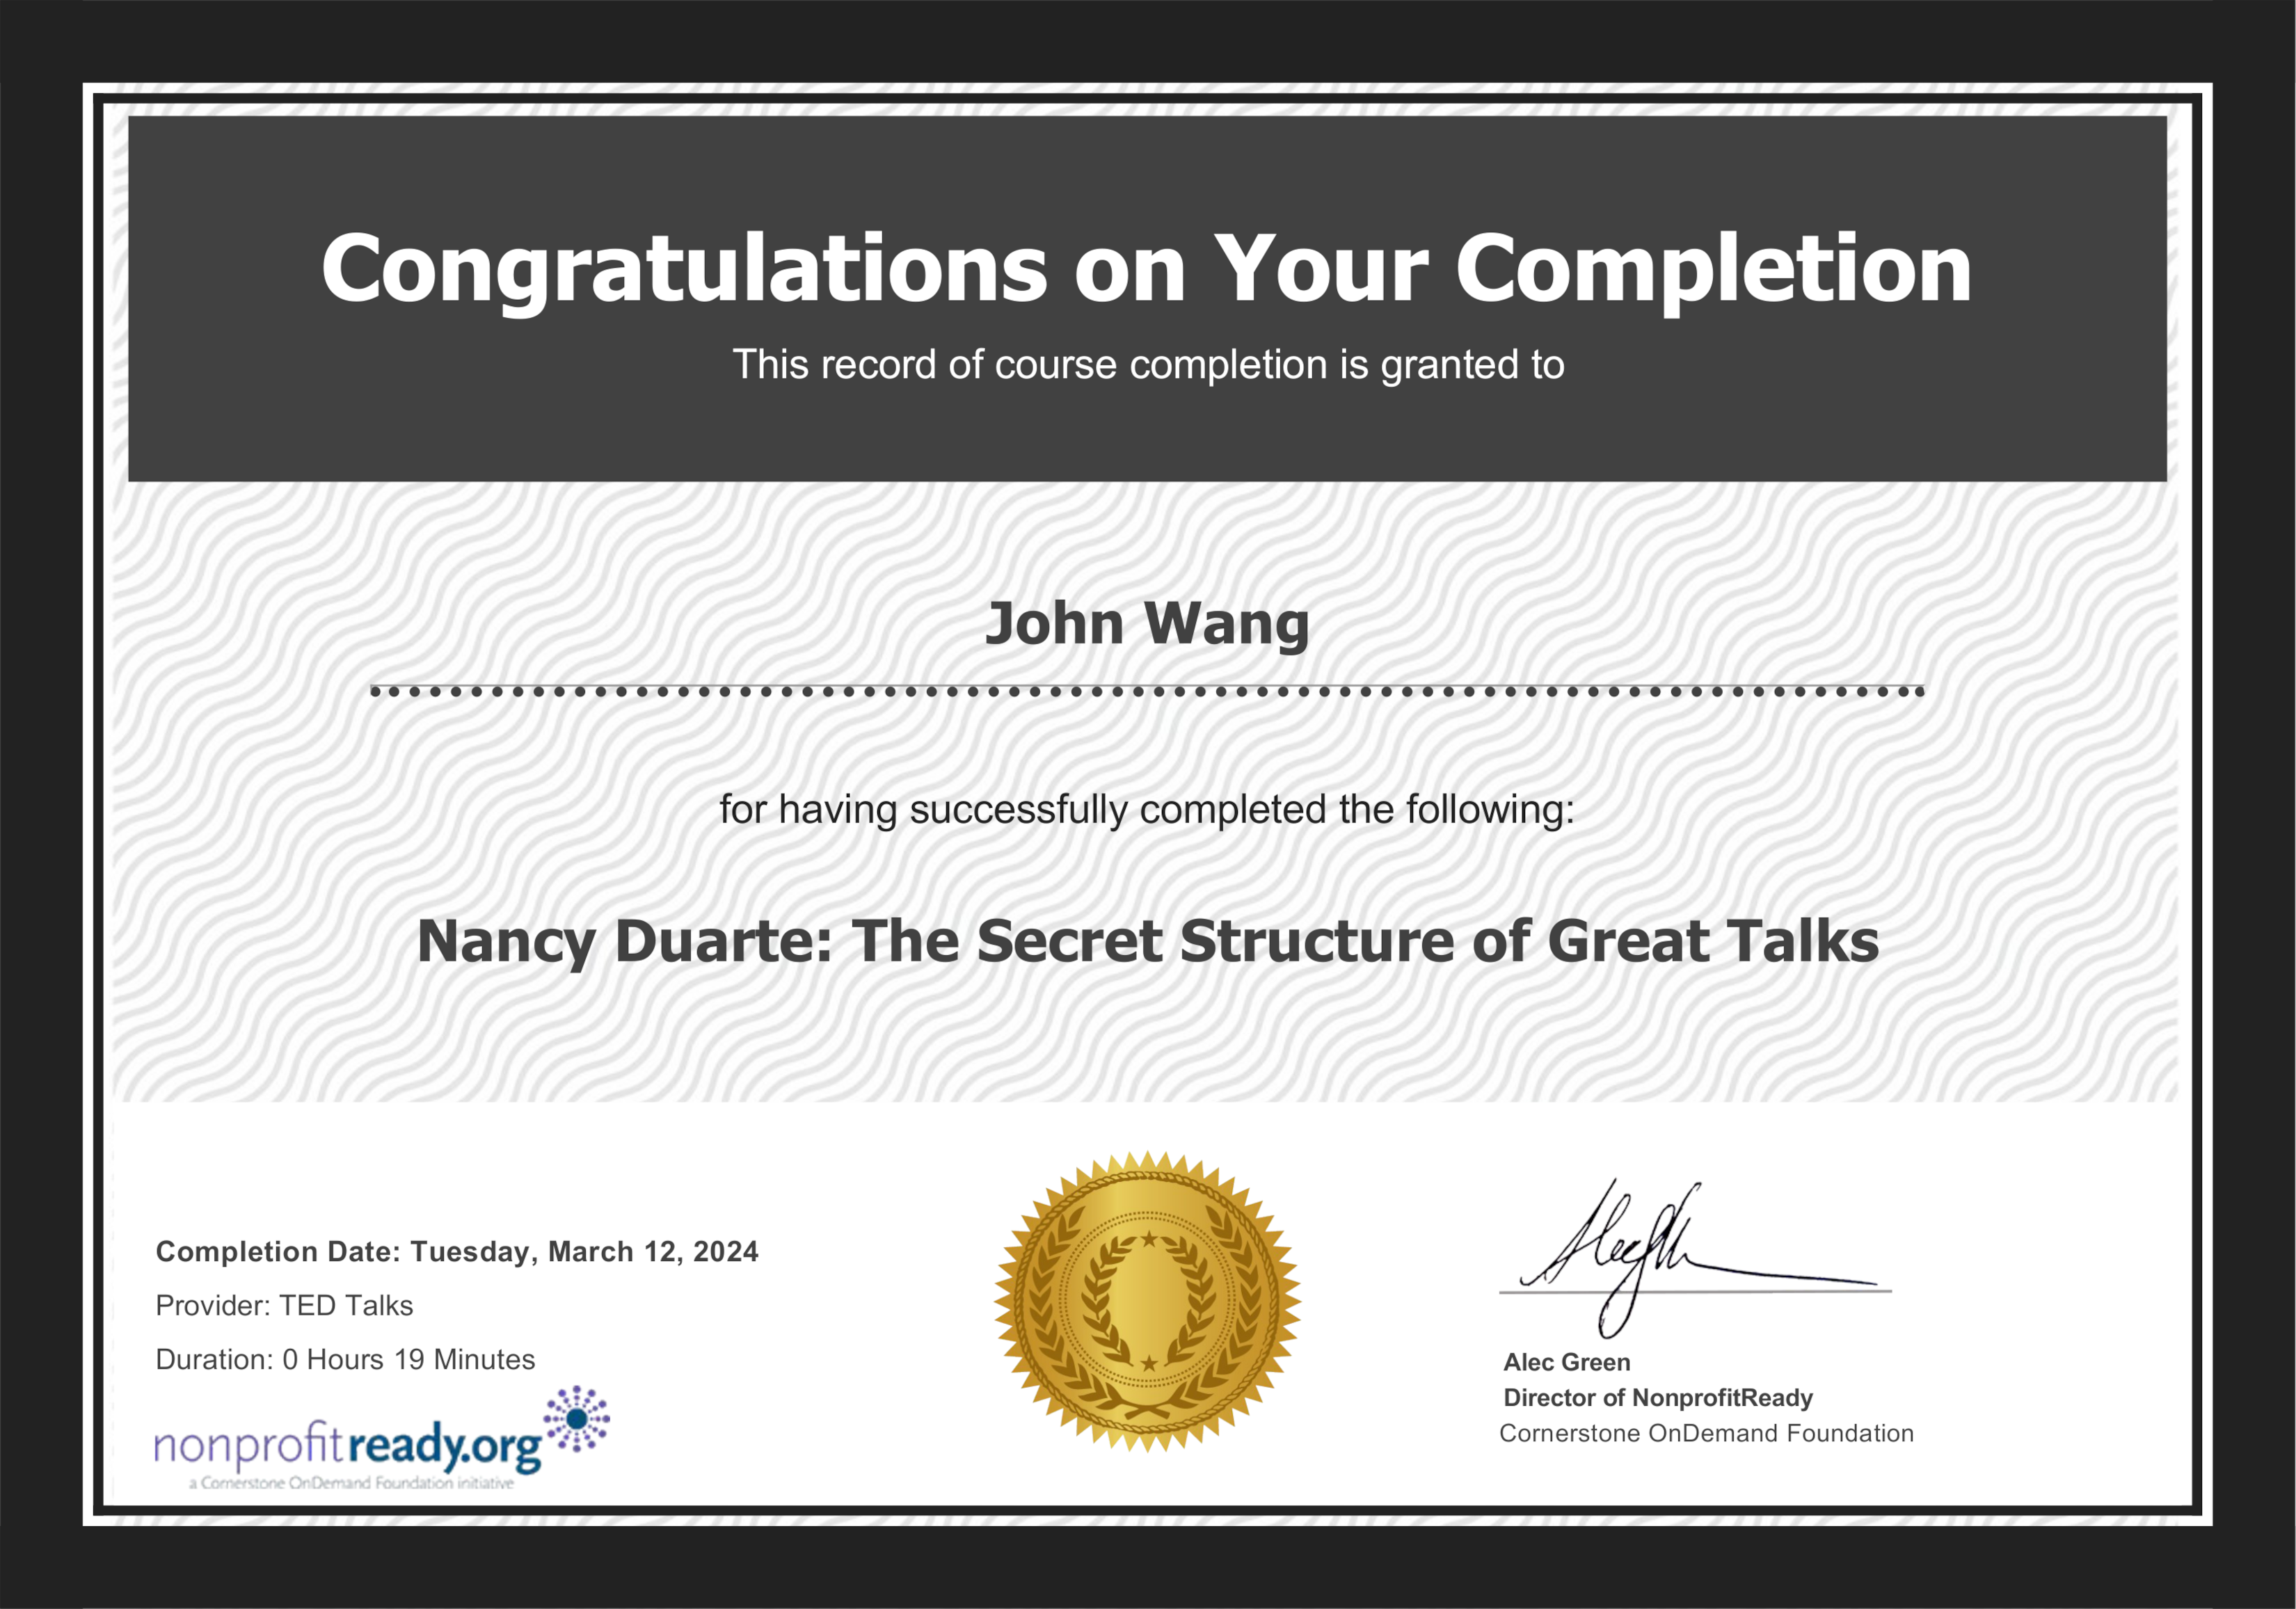 John's The Secret Structure of Great Talks from TED Talks by Nancy Duarte